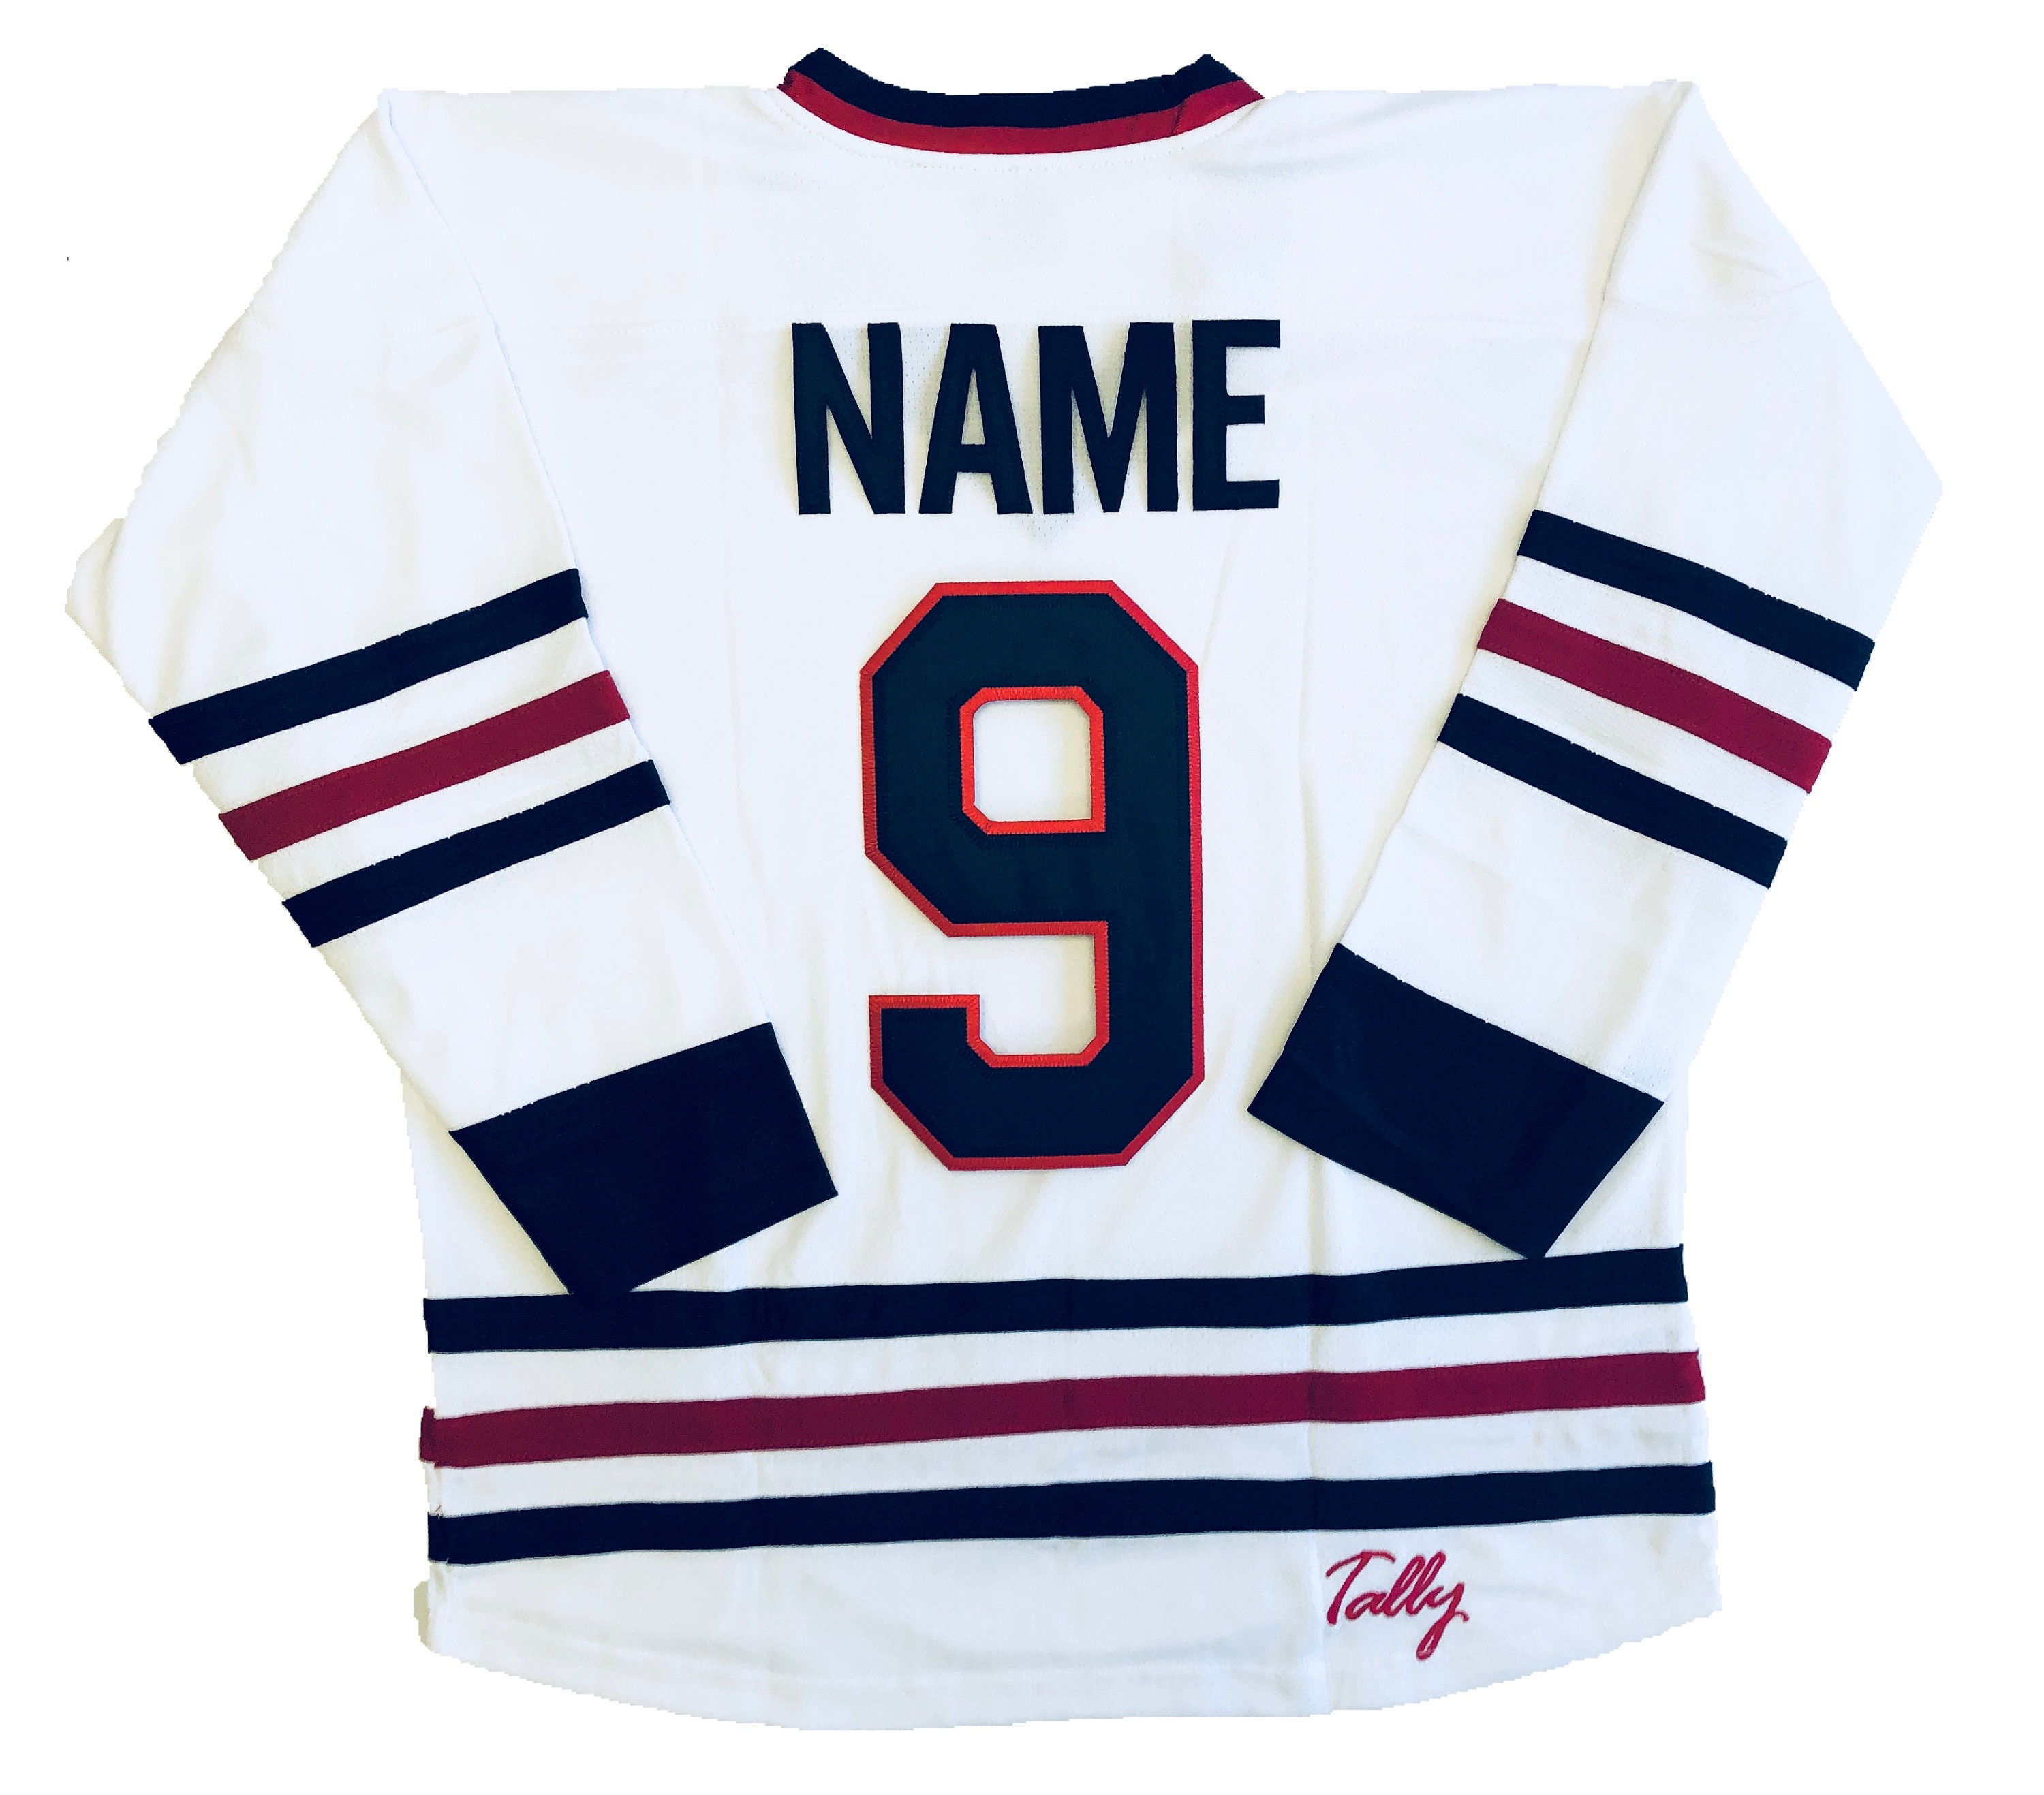 Stan Mikita's Donuts Hockey Jerseys We Customize With 